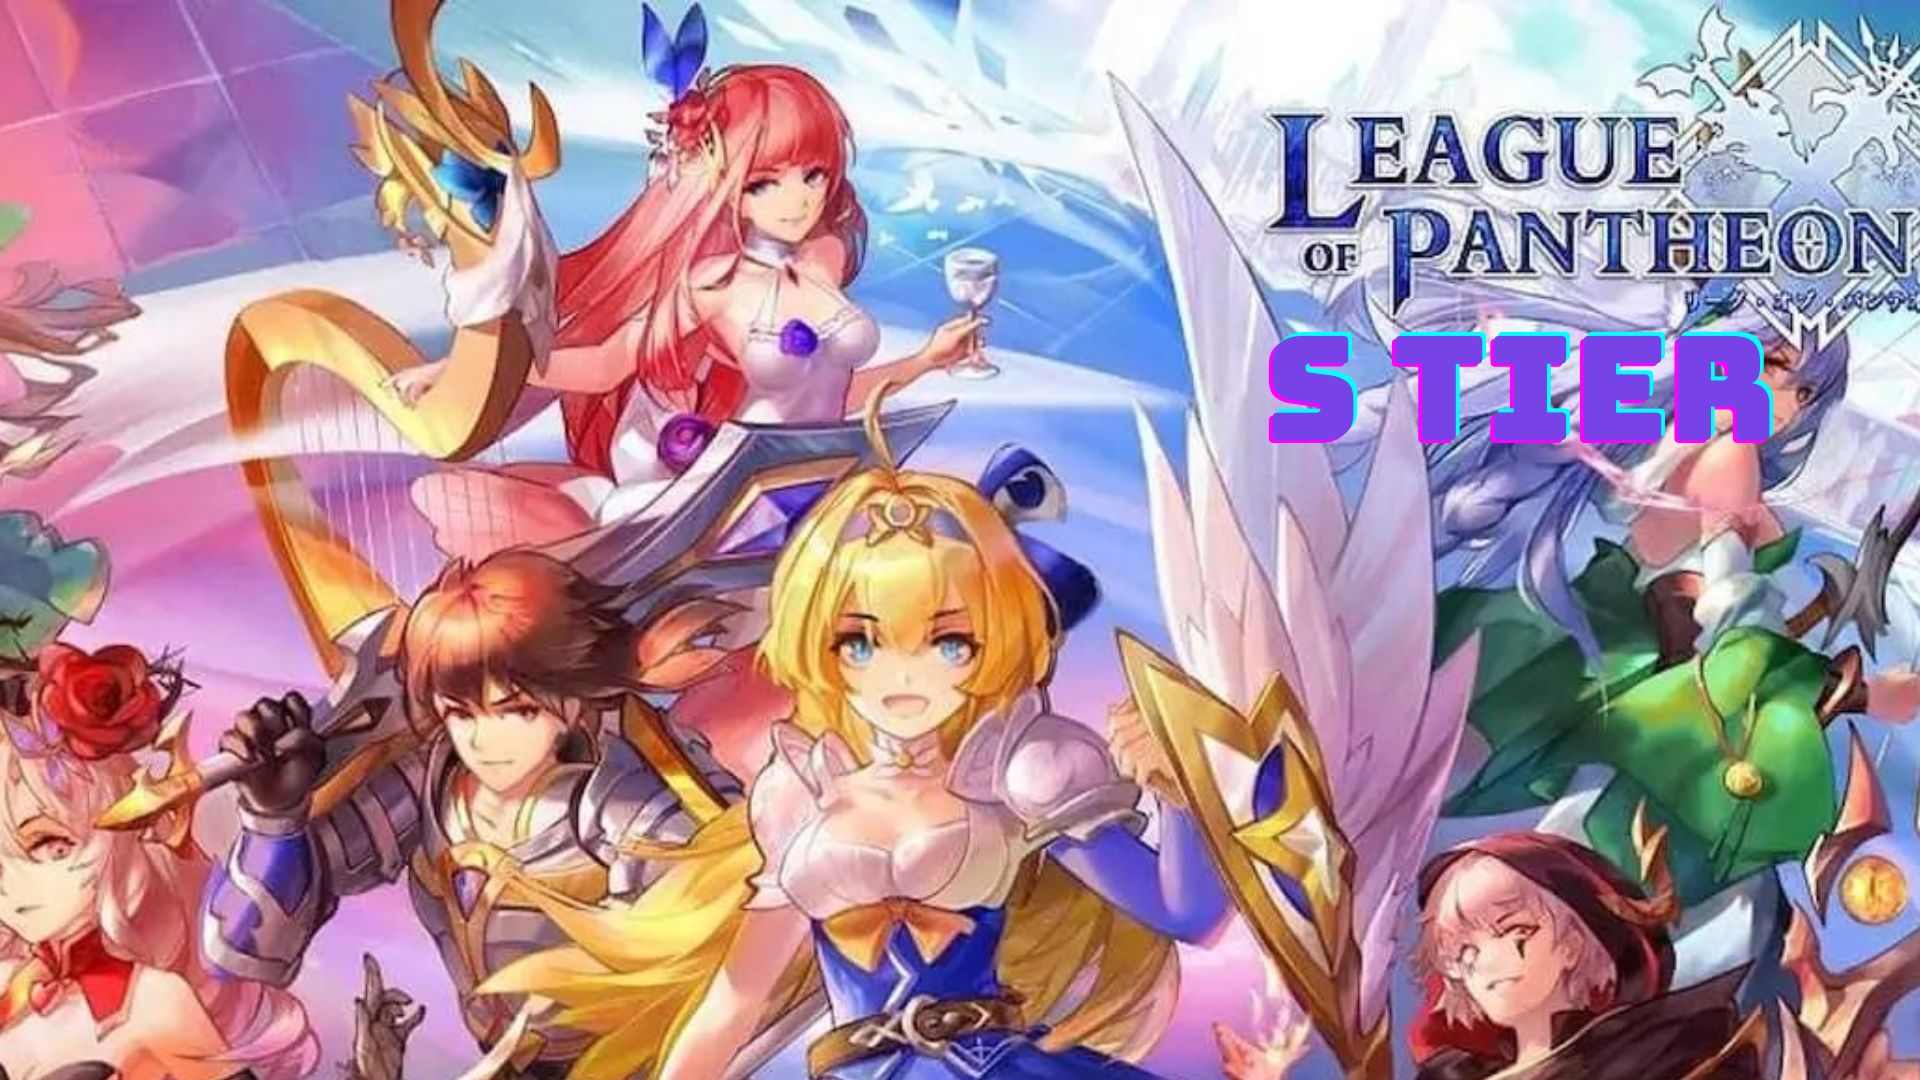 Best heroes of the League of Pantheons